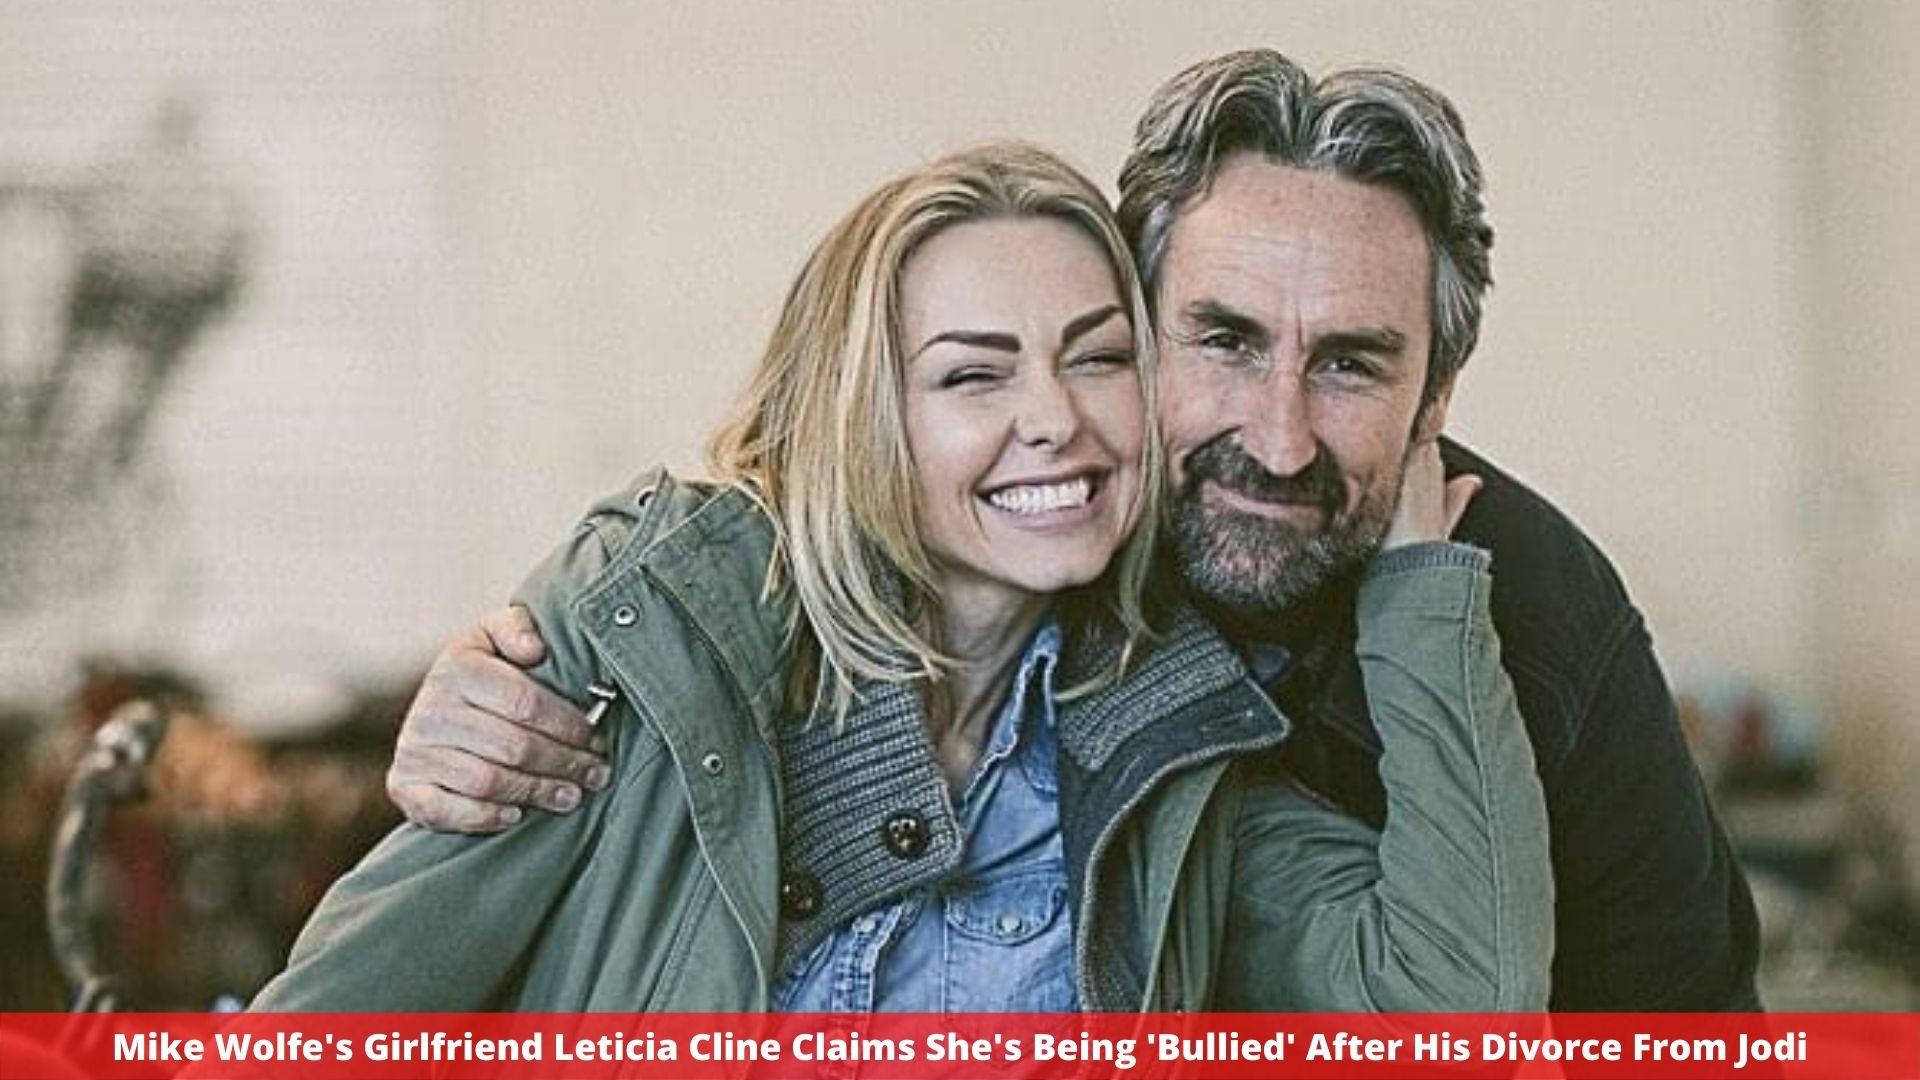 Mike Wolfe's Girlfriend Leticia Cline Claims She's Being 'Bullied' After His Divorce From Jodi